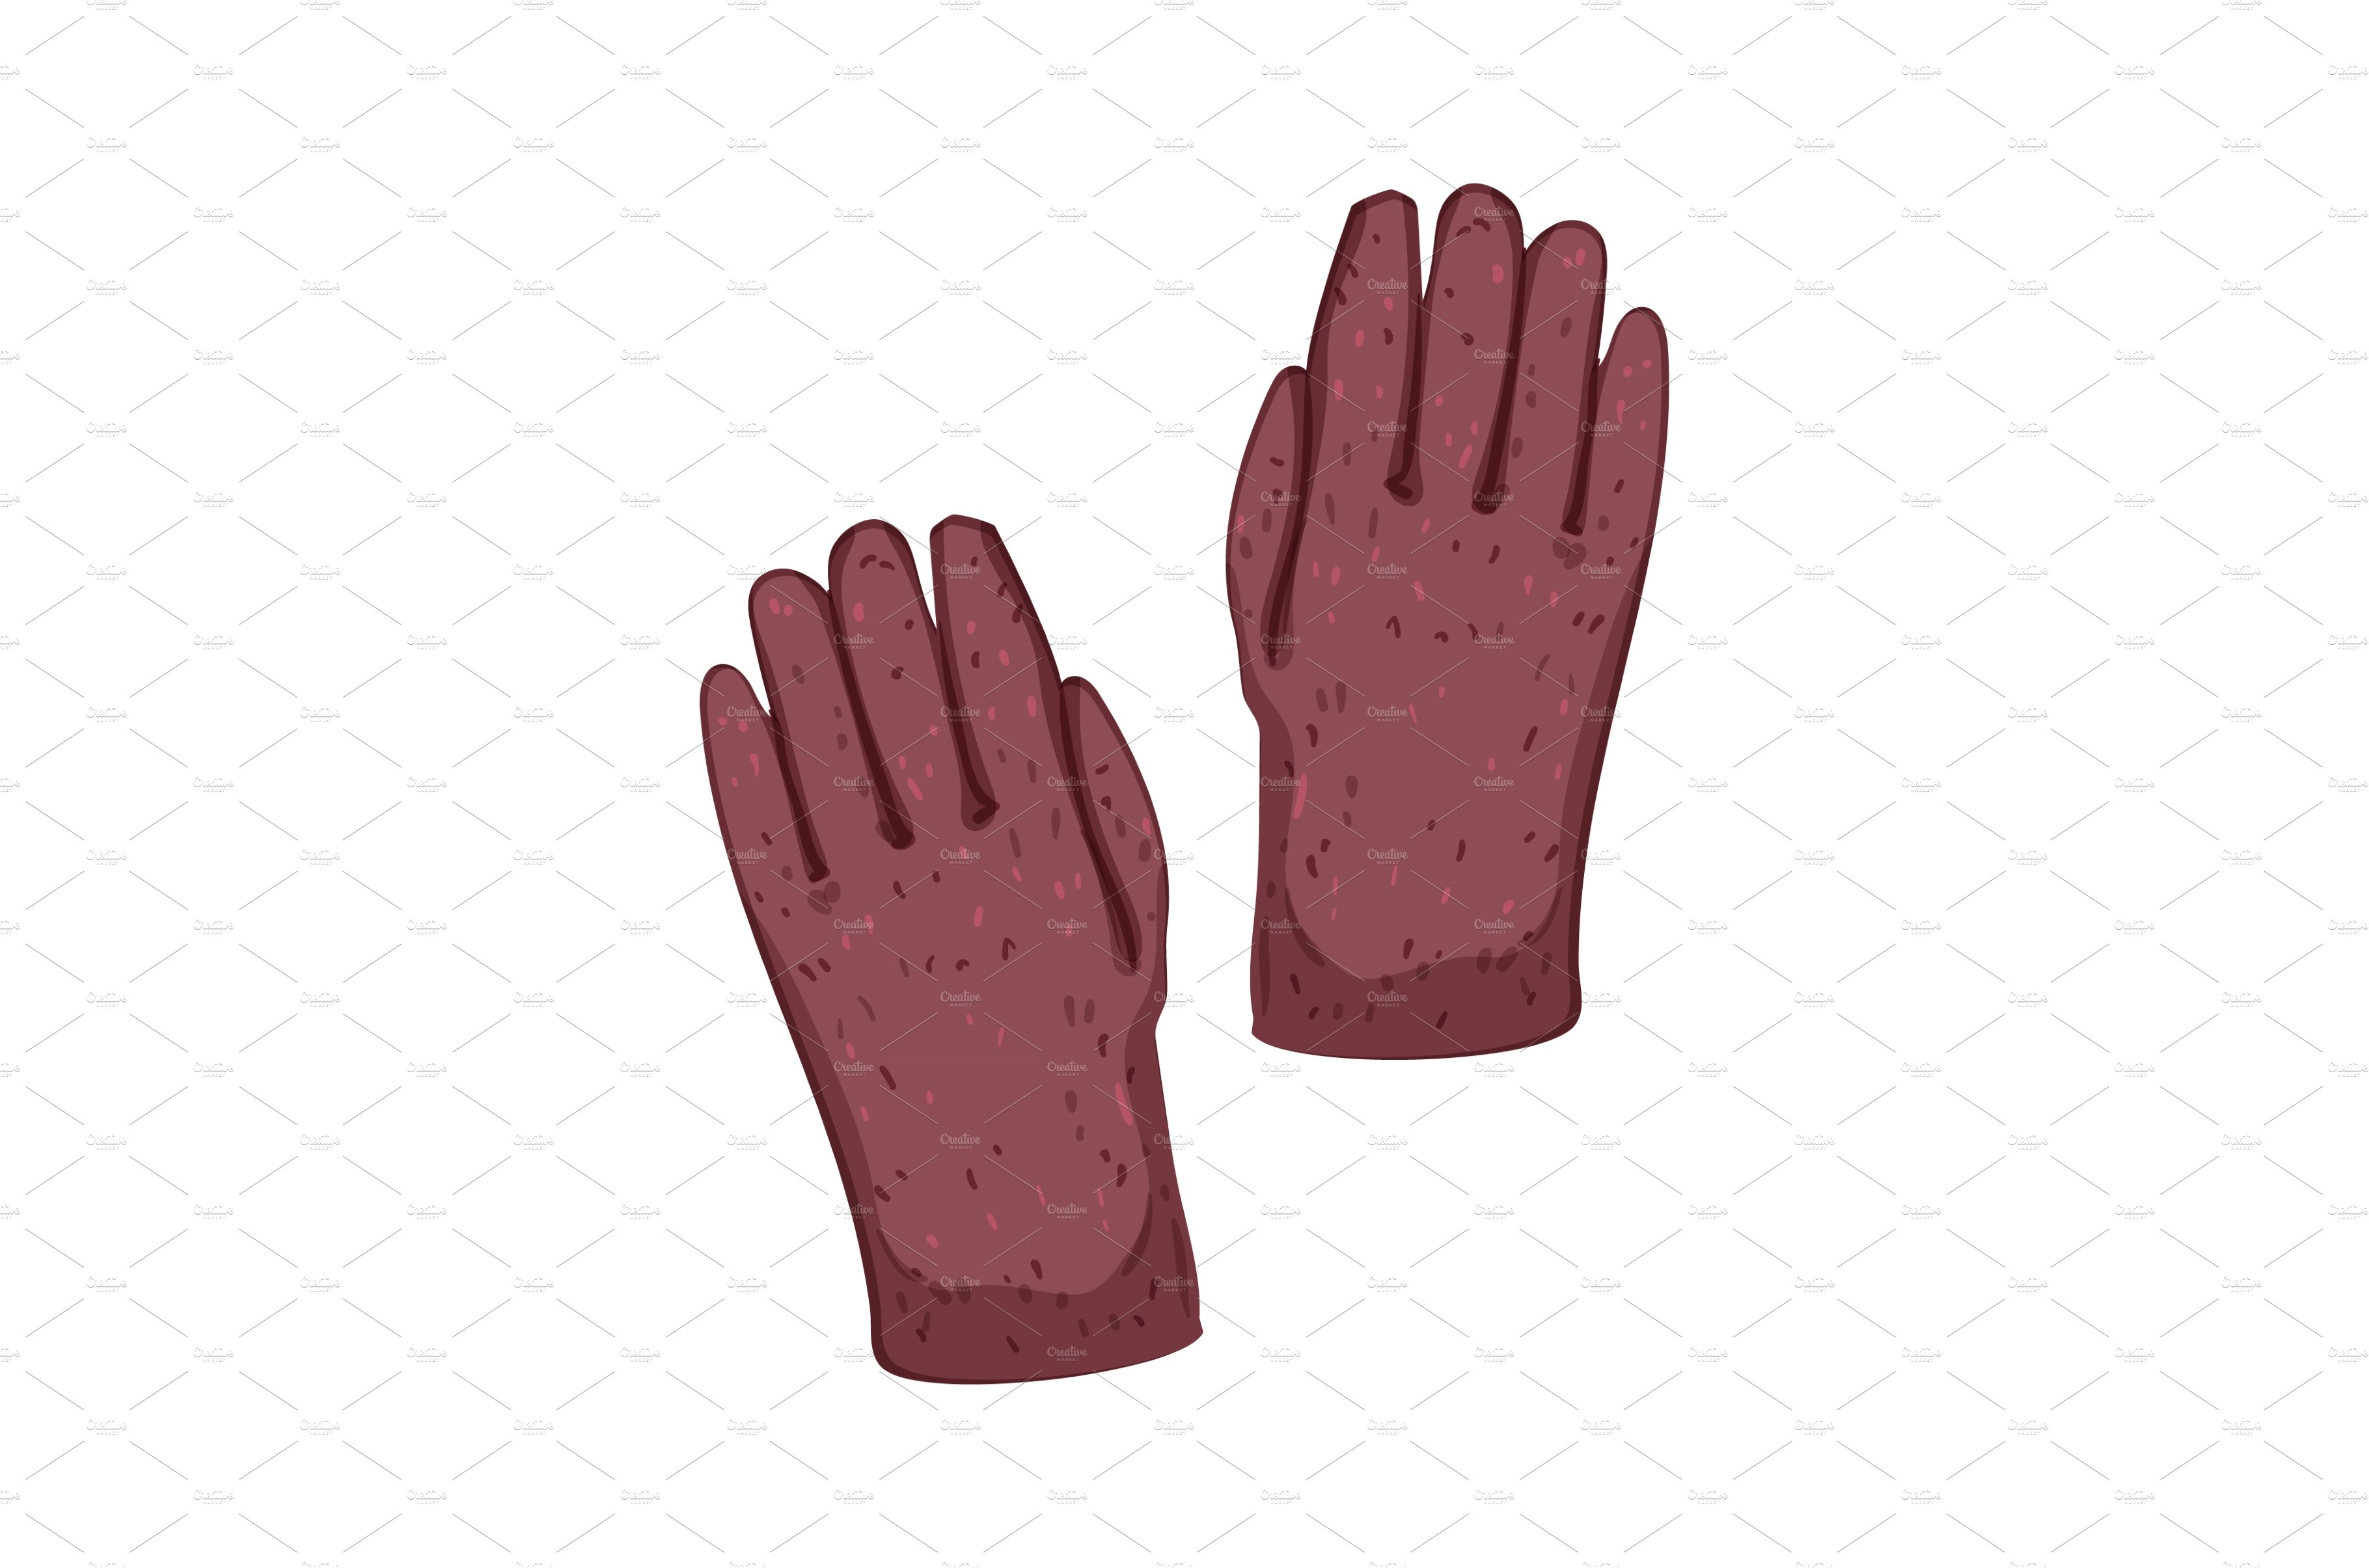 textile mittens gloves winter cover image.